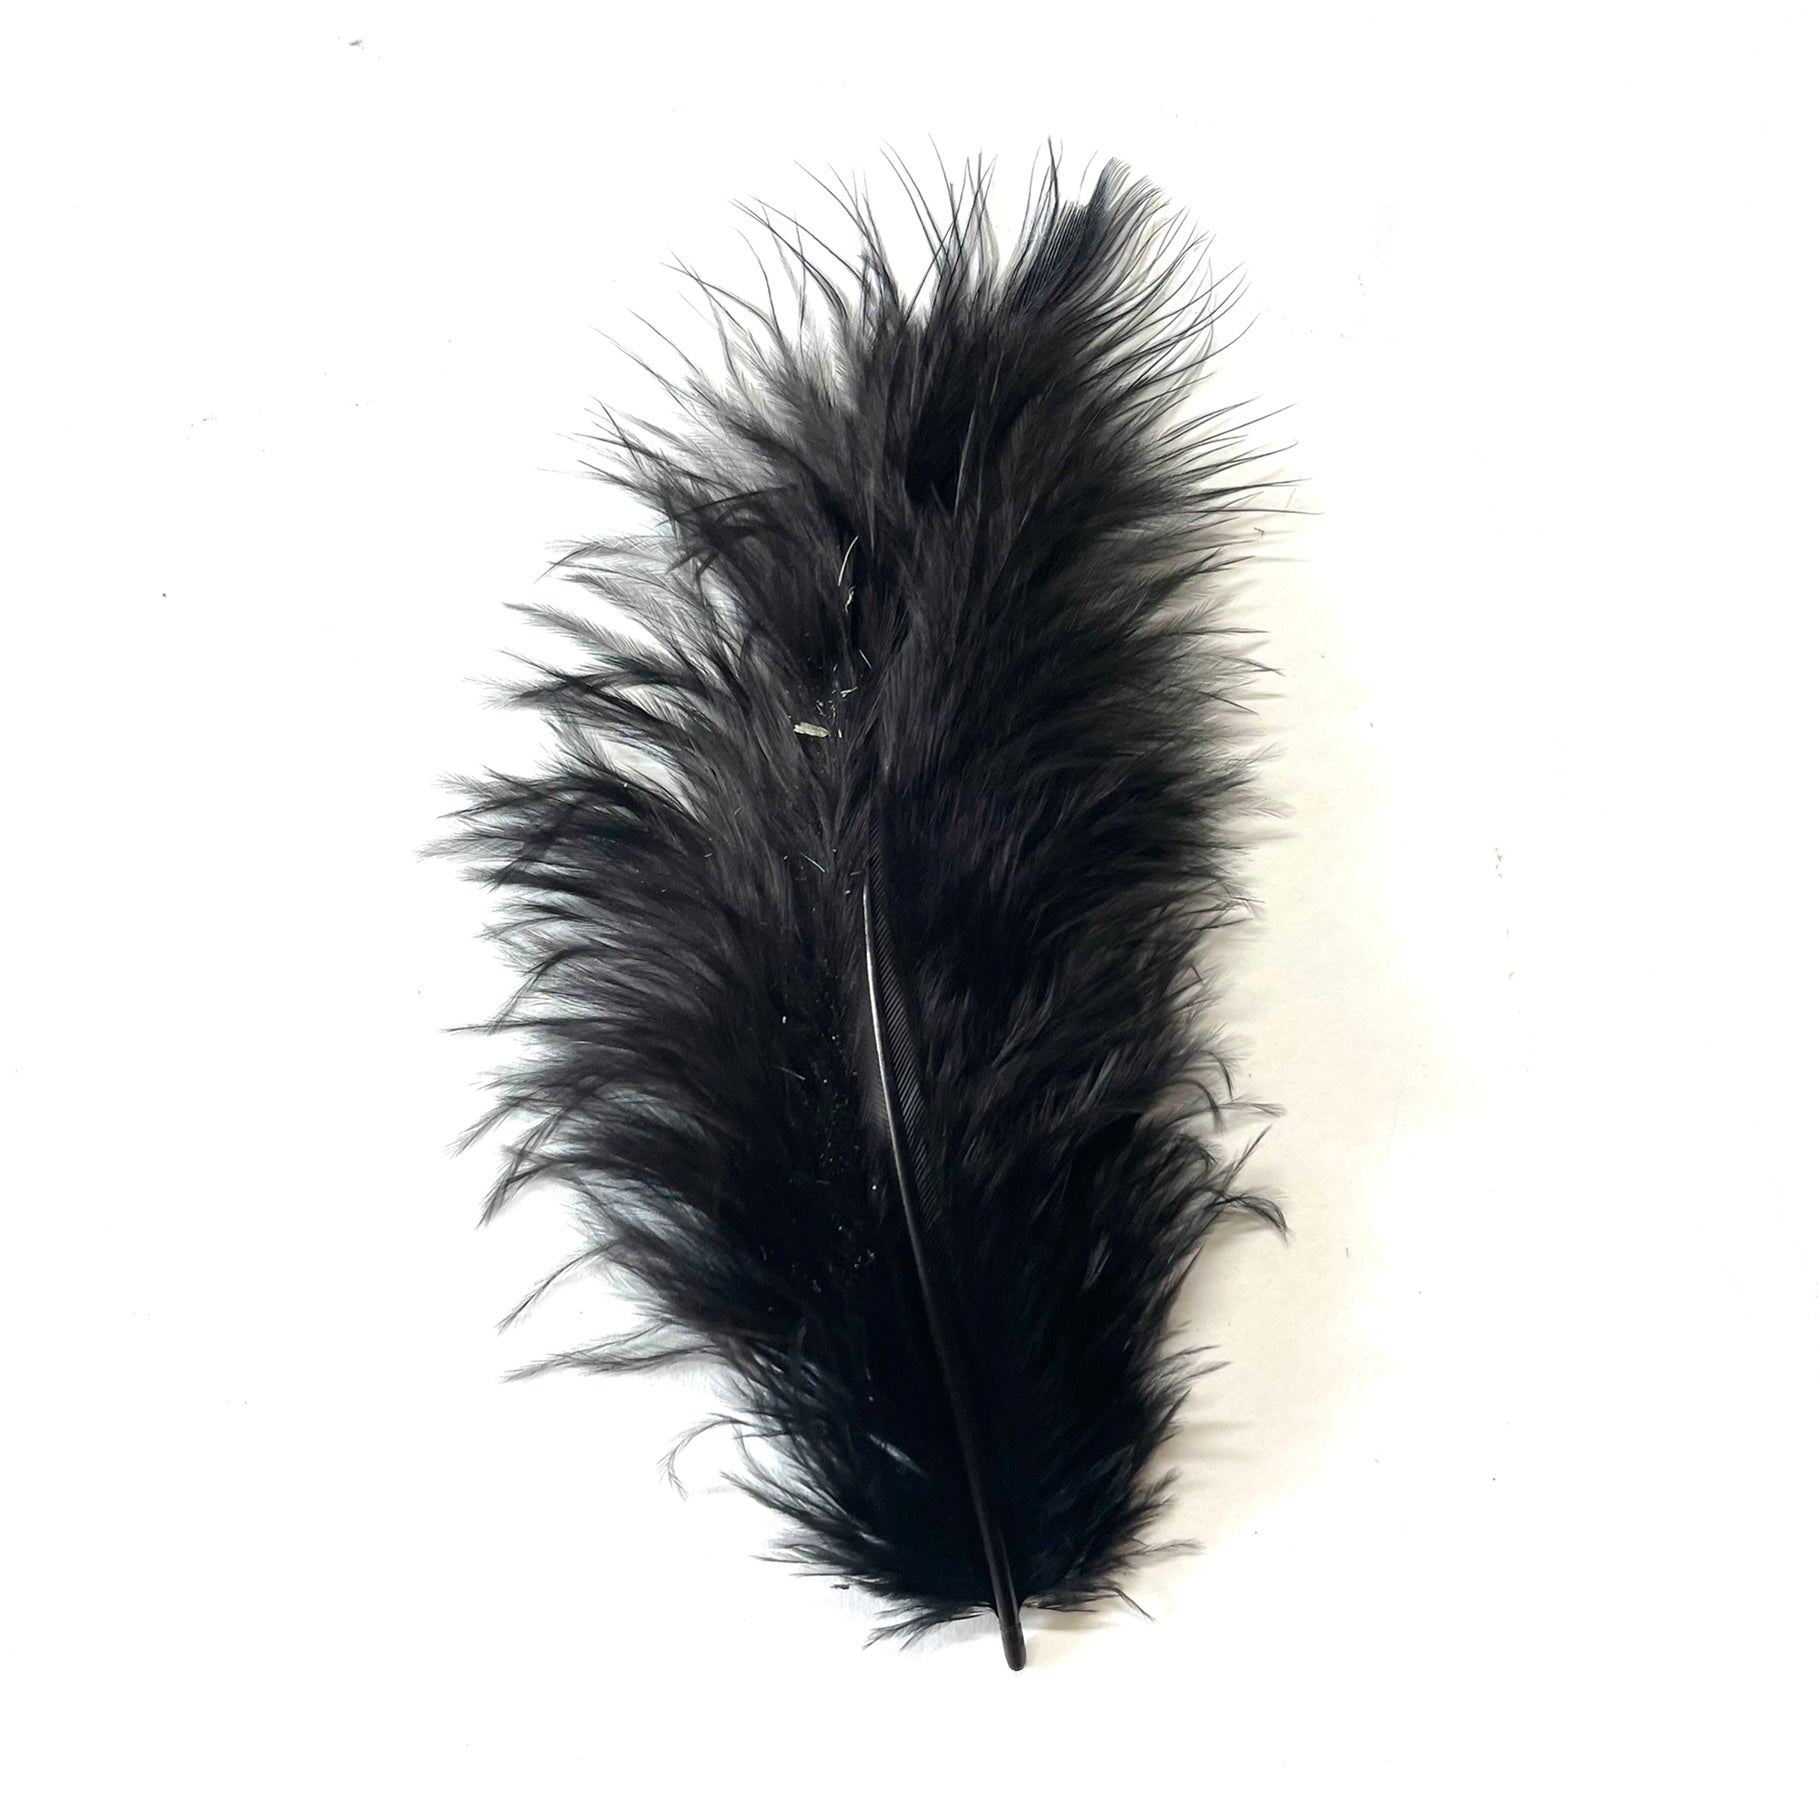 Fluffy Marabou Feather Plumage Pack 10 grams - Black